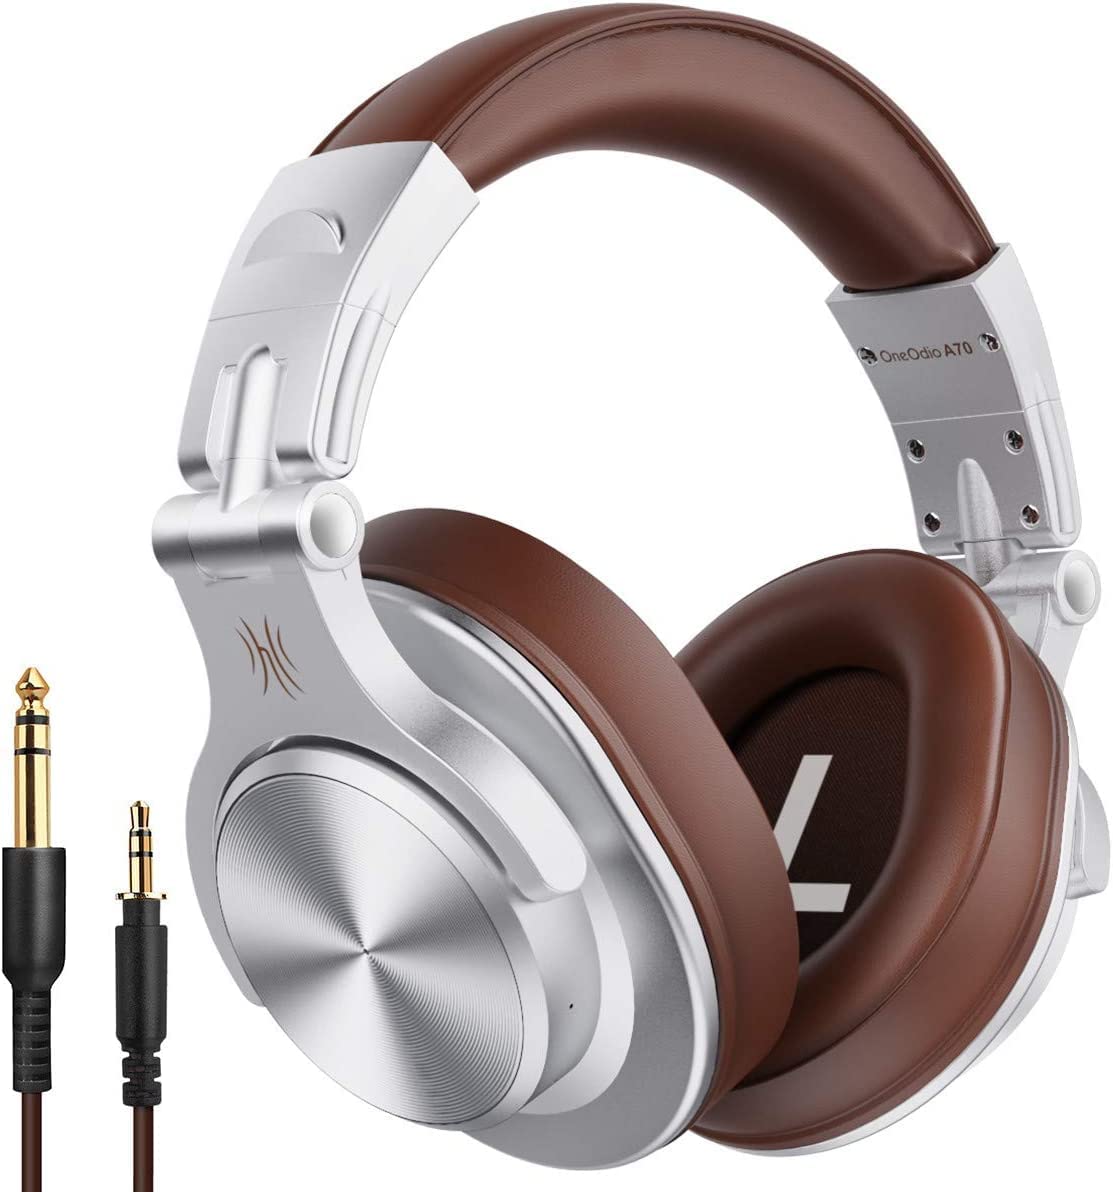 OneOdio A70 Over Ear Bluetooth Headphones